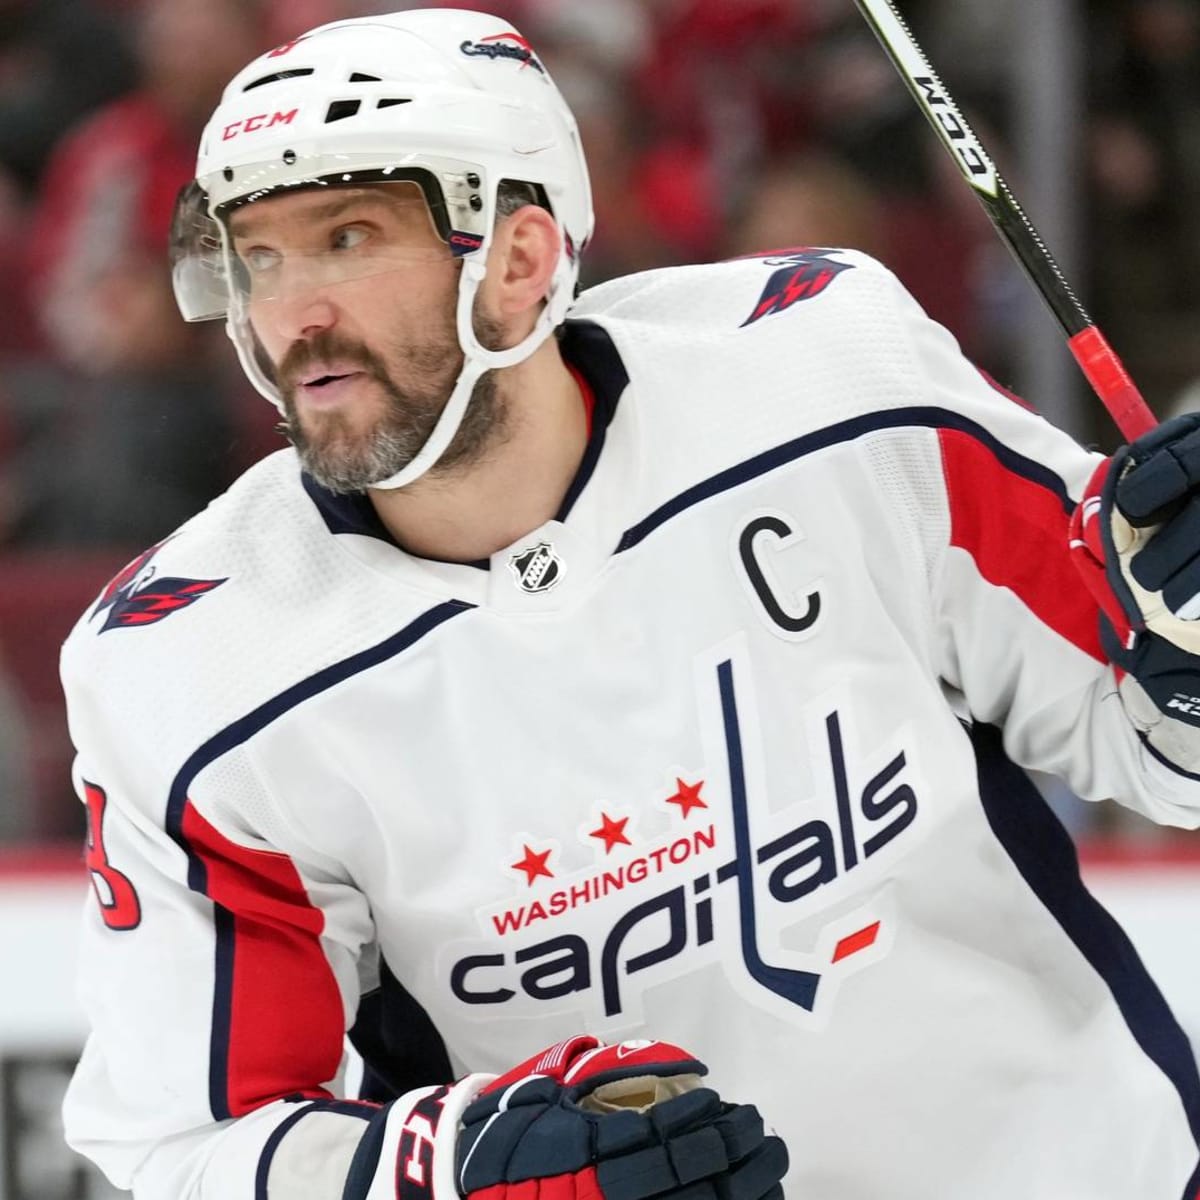 Alex Ovechkin's 787th goal breaks Gordie Howe's NHL record for